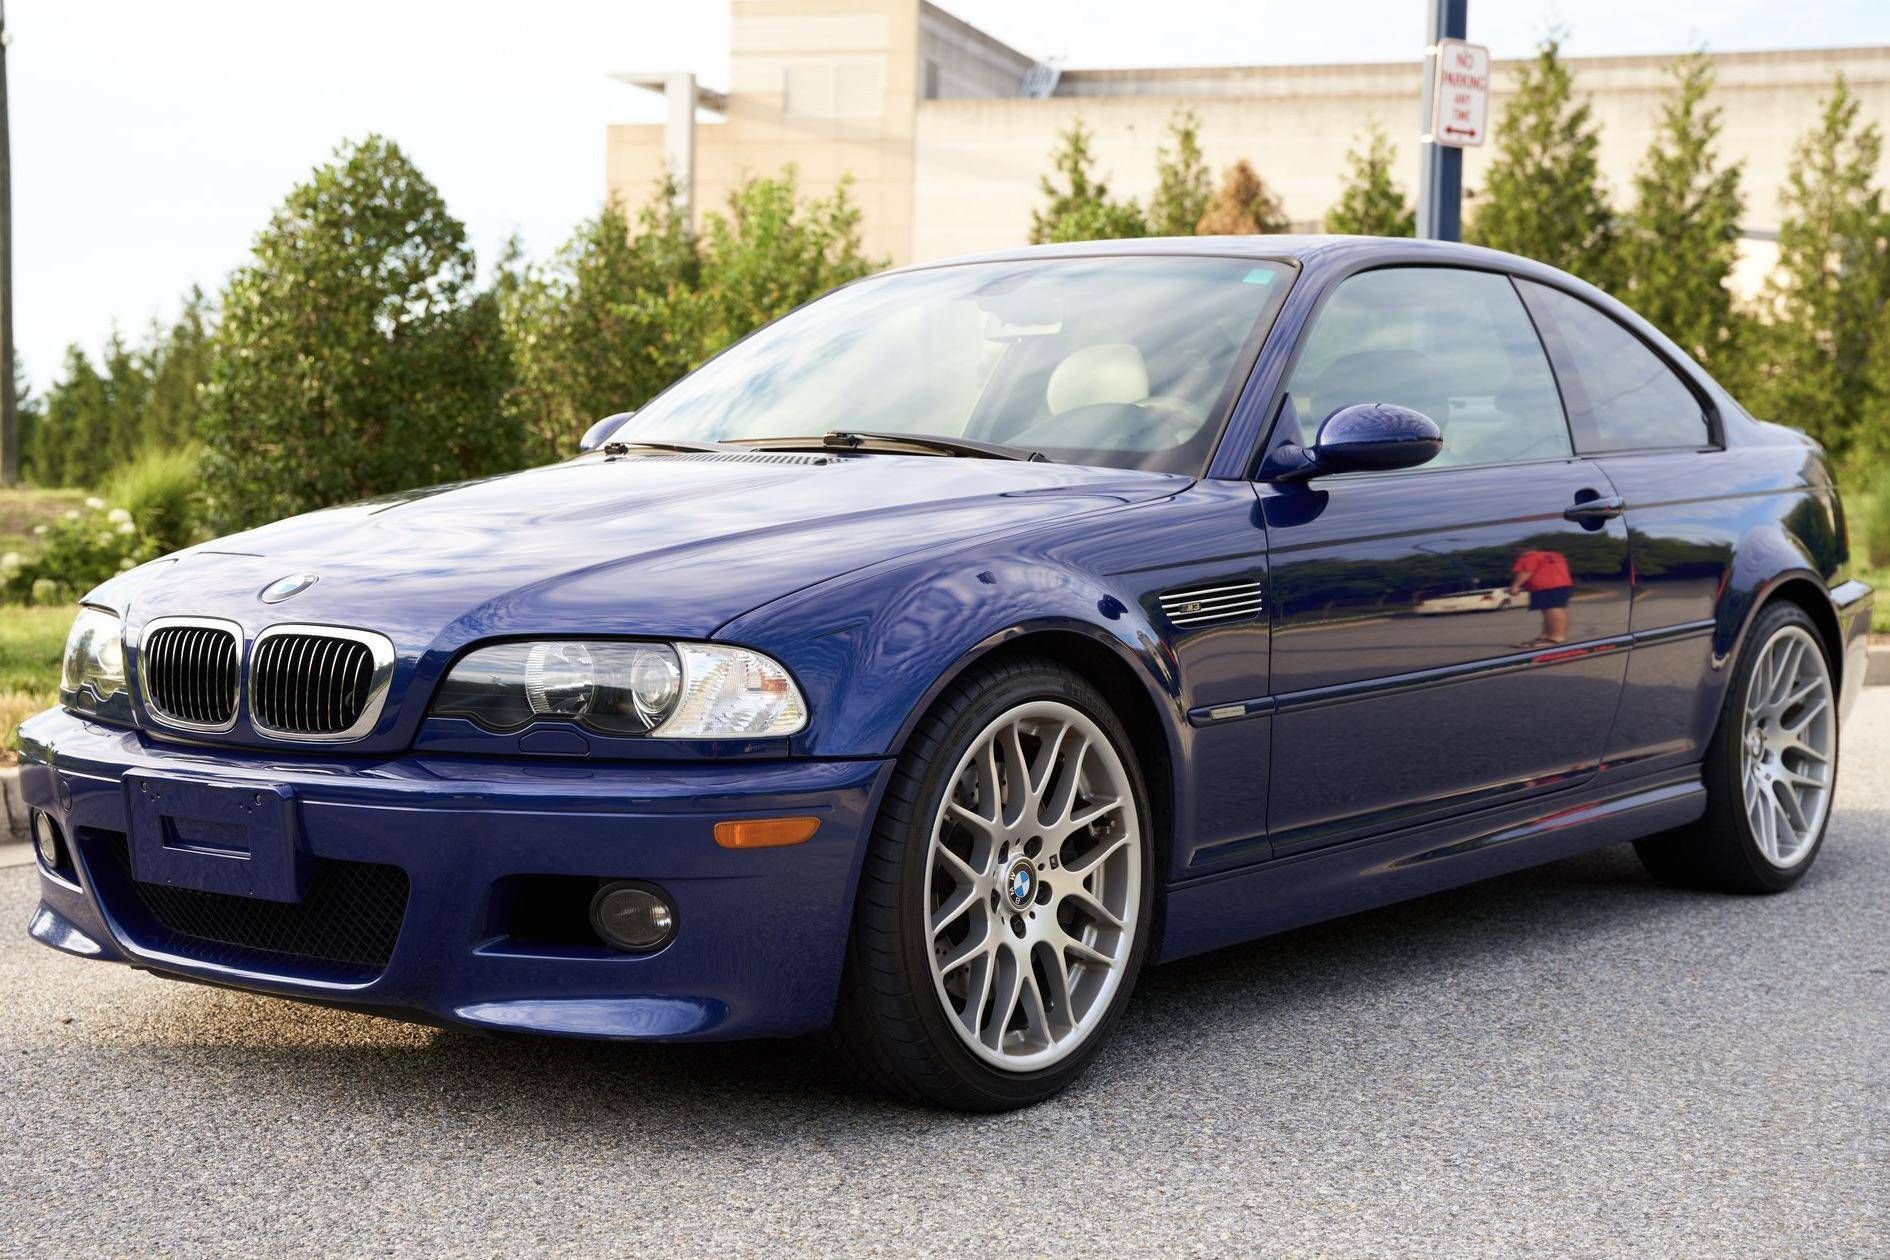 2006 BMW M3: The performance car that is a sports car.